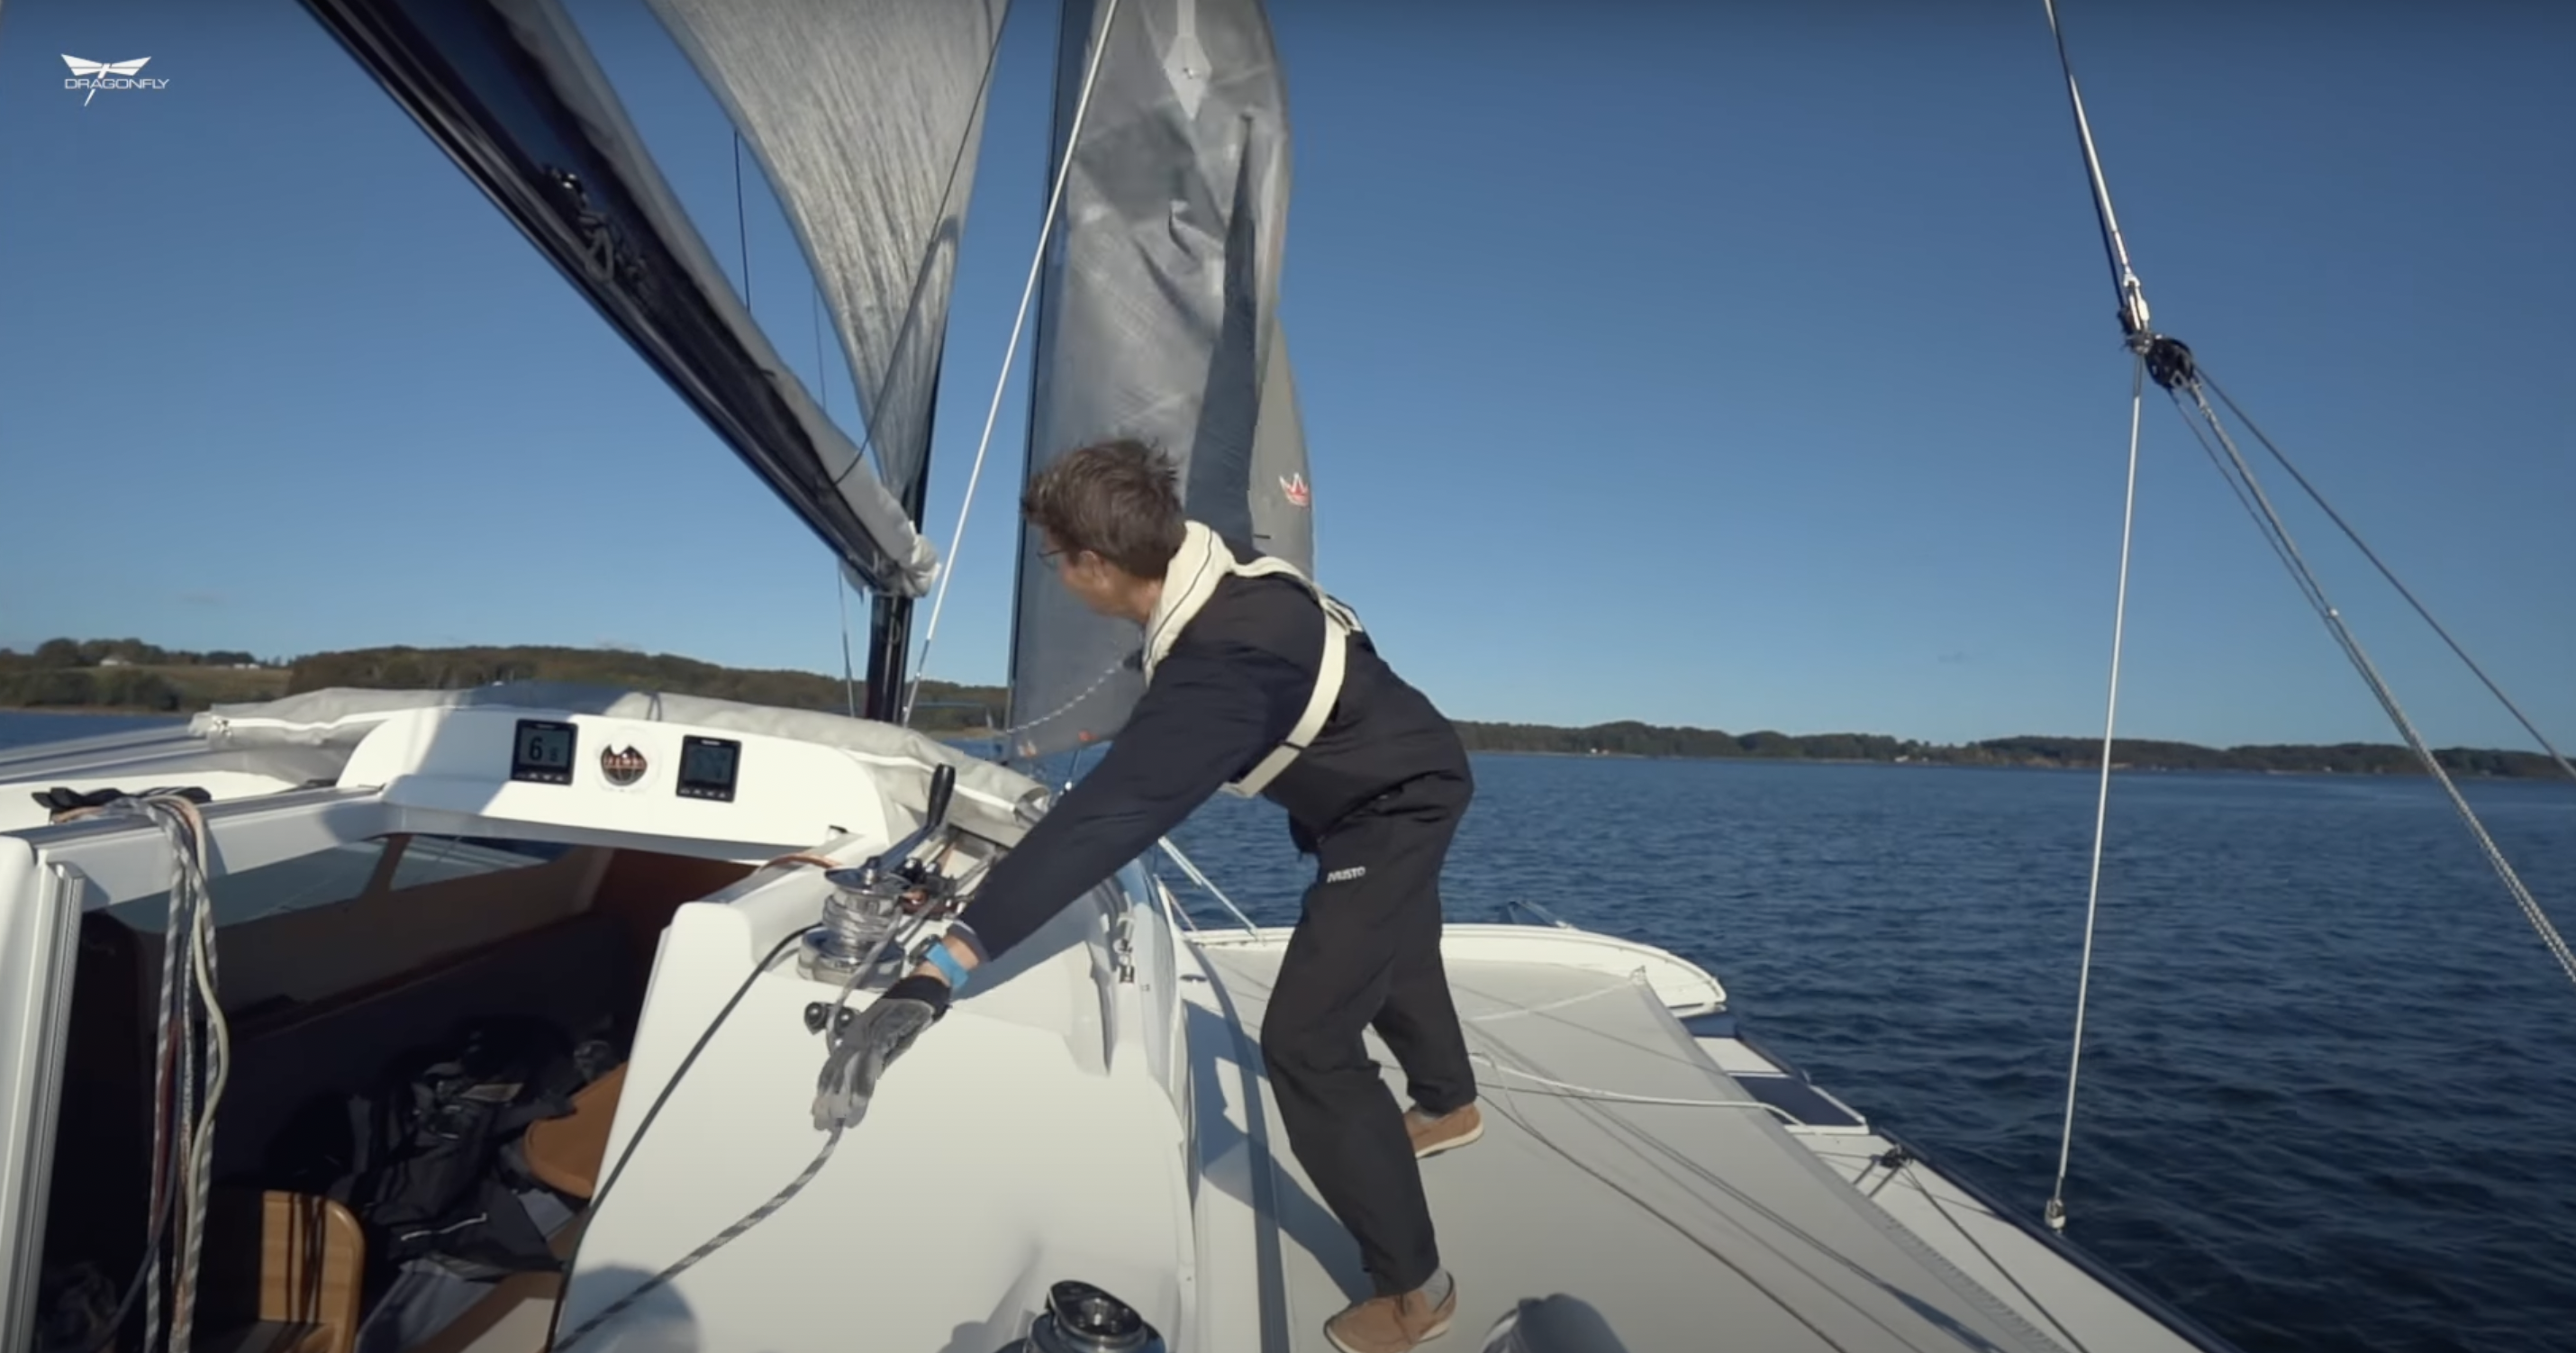 Dragonfly Trimaran Sail Guide Stronger Wind Conditions TMG Australia Reefing Headsail